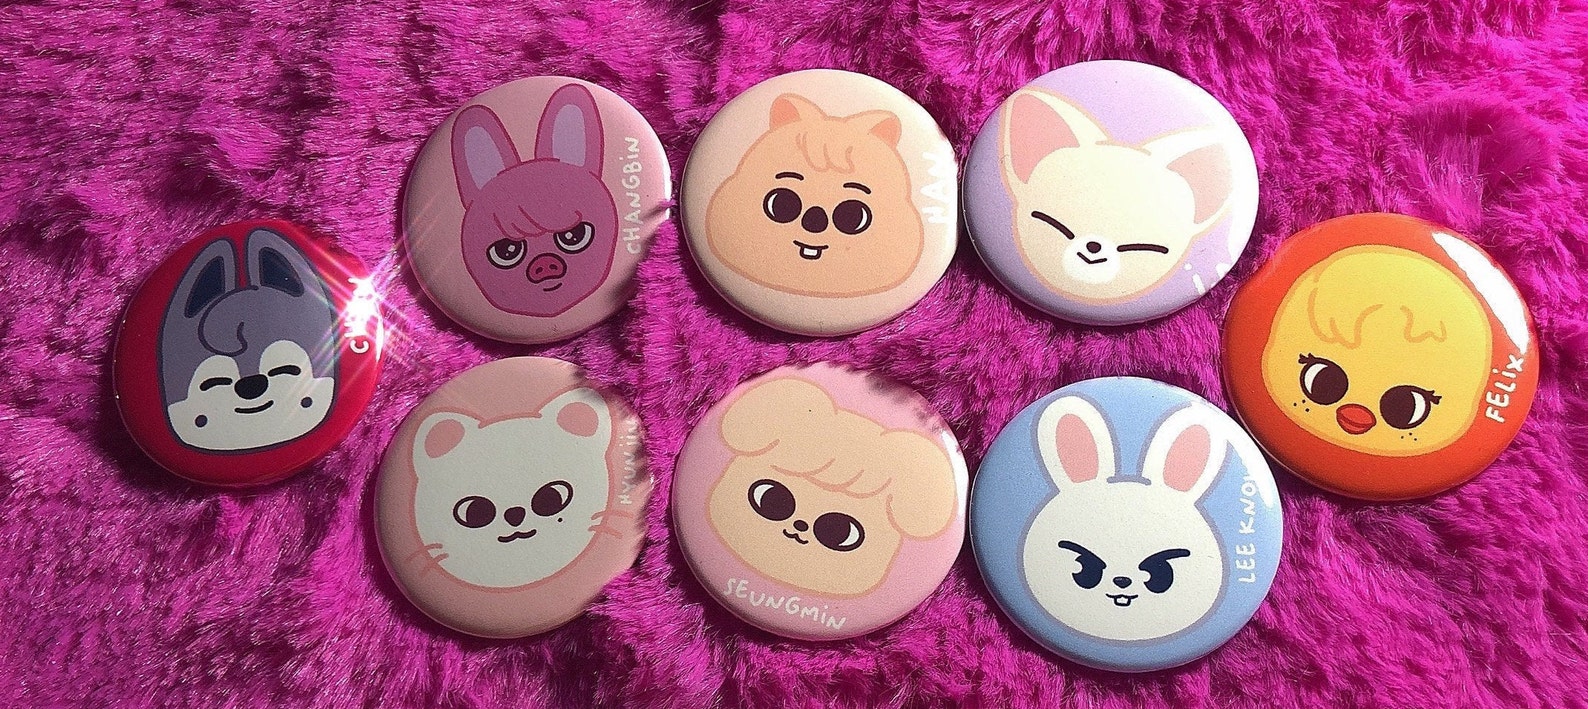 Stray kids buttons 1.5 inches | Etsy